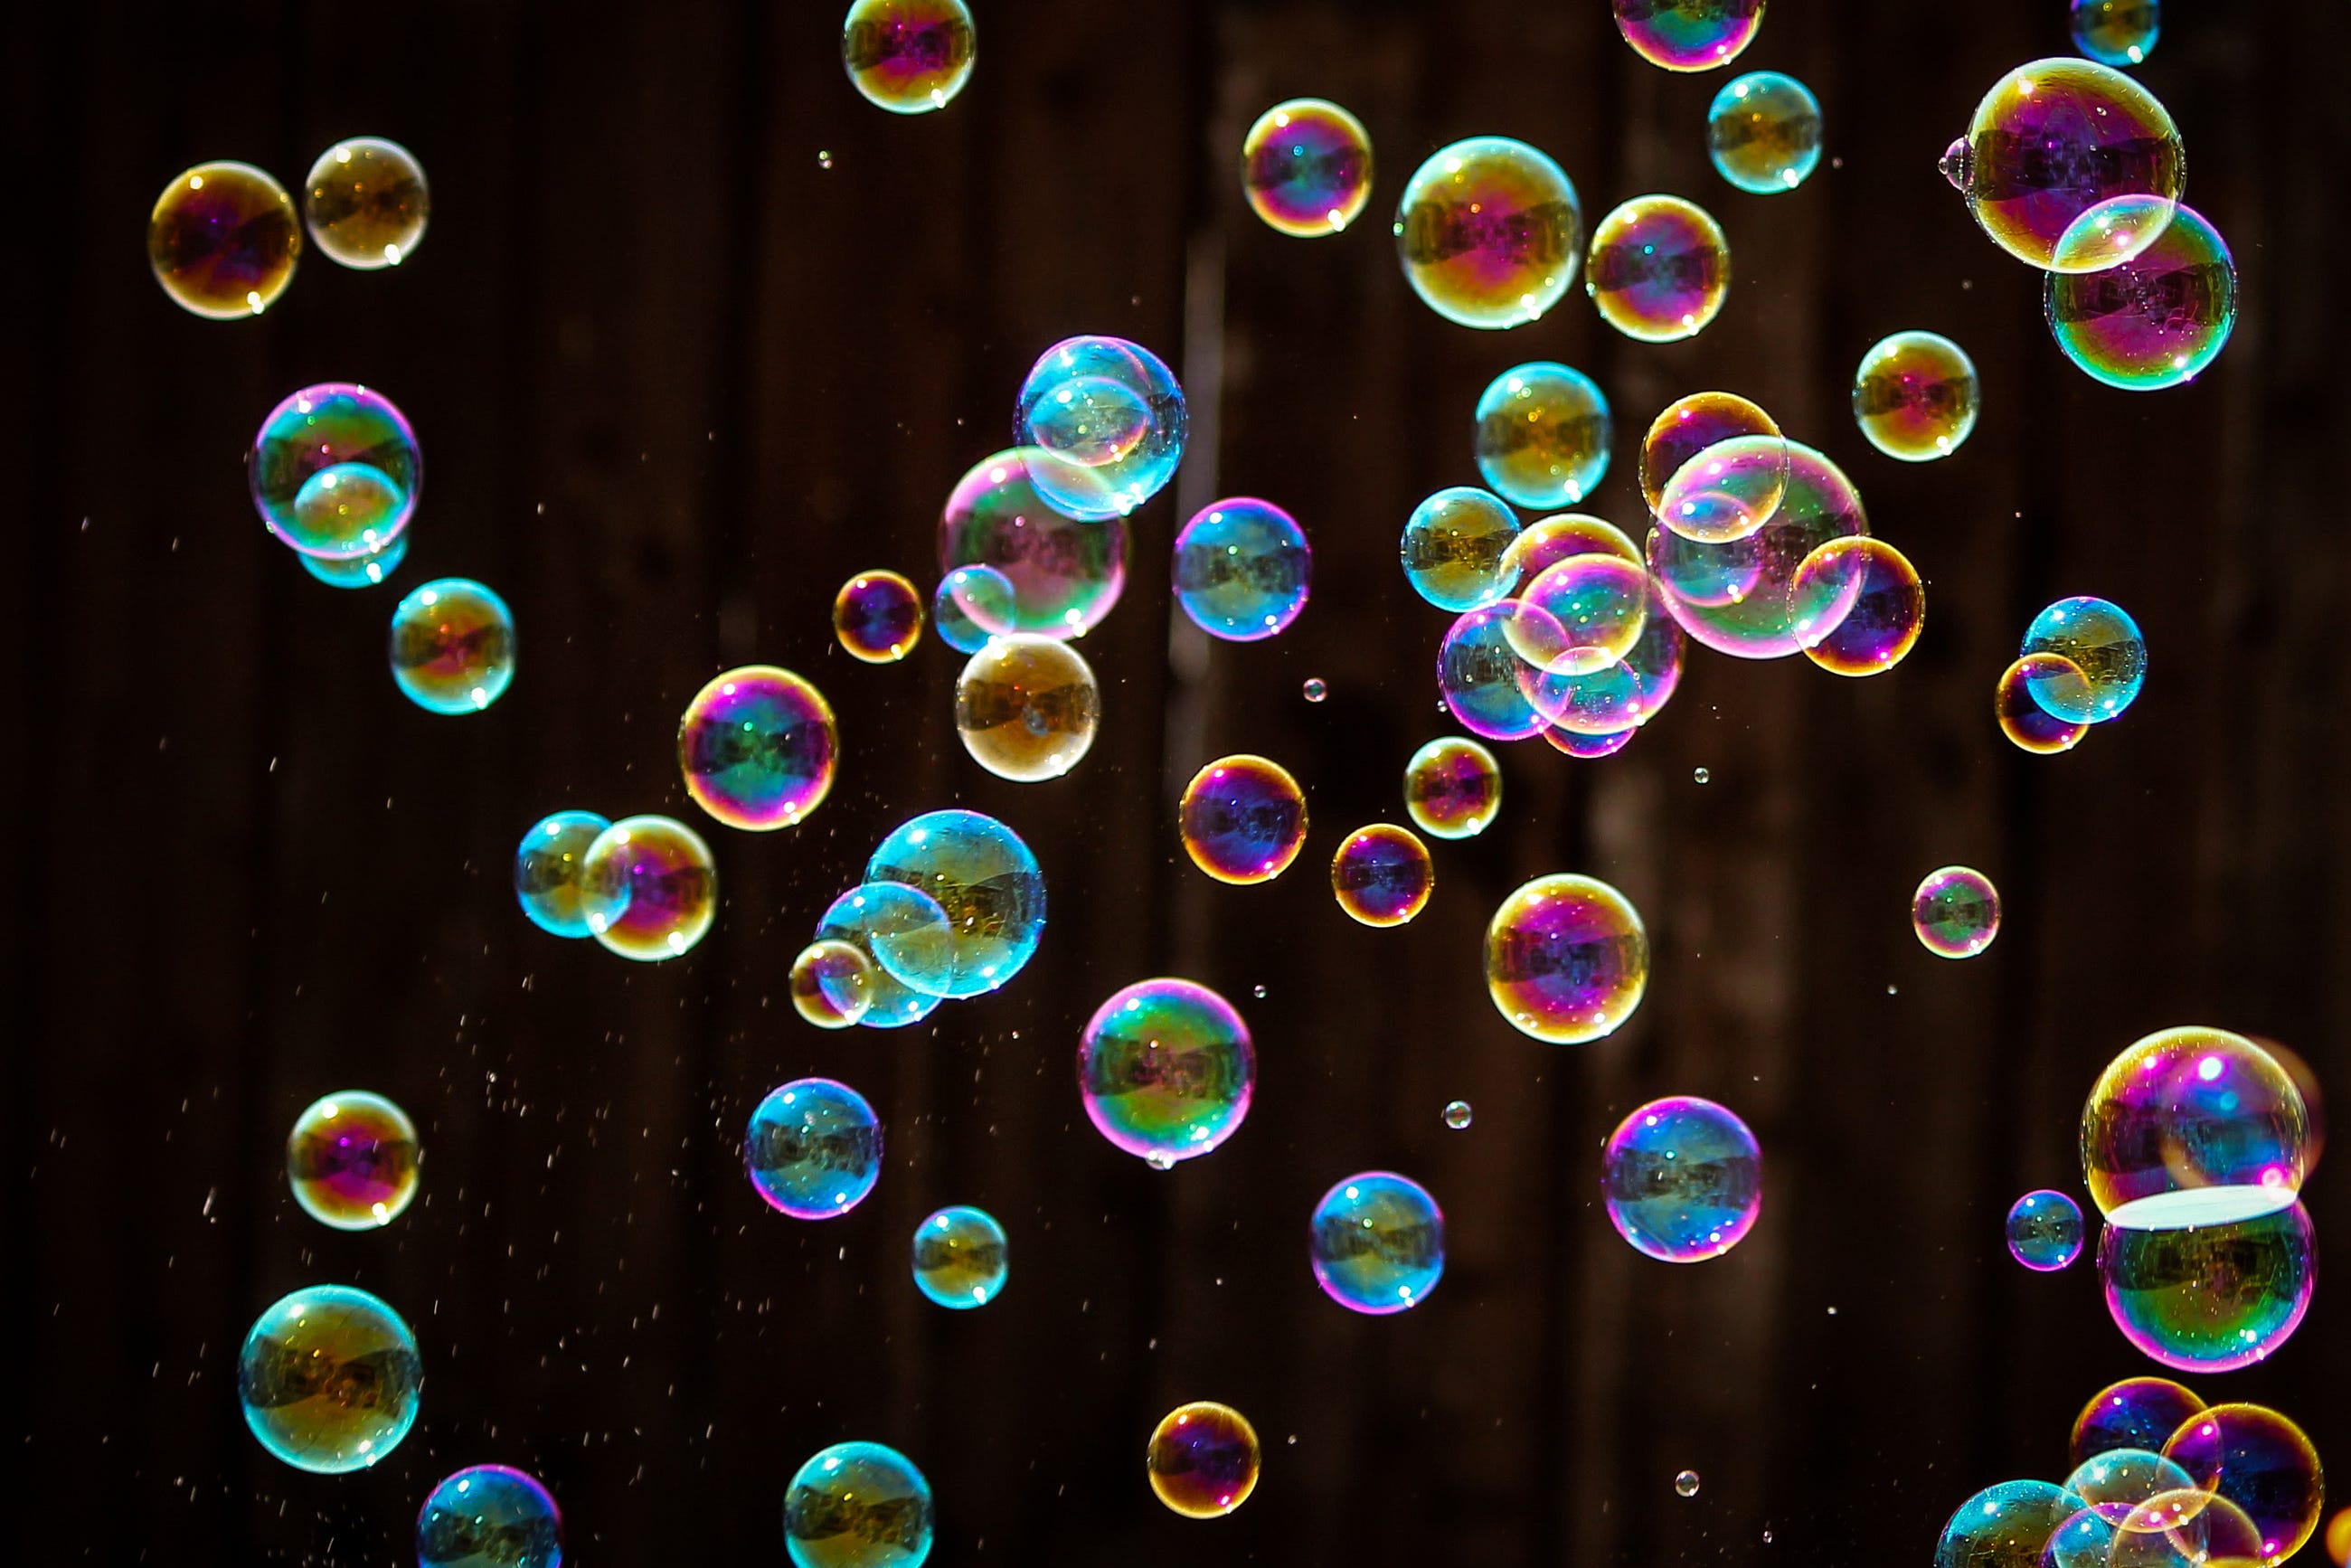 Can MIT’s “Space Bubbles” Completely Stop Climate Change-